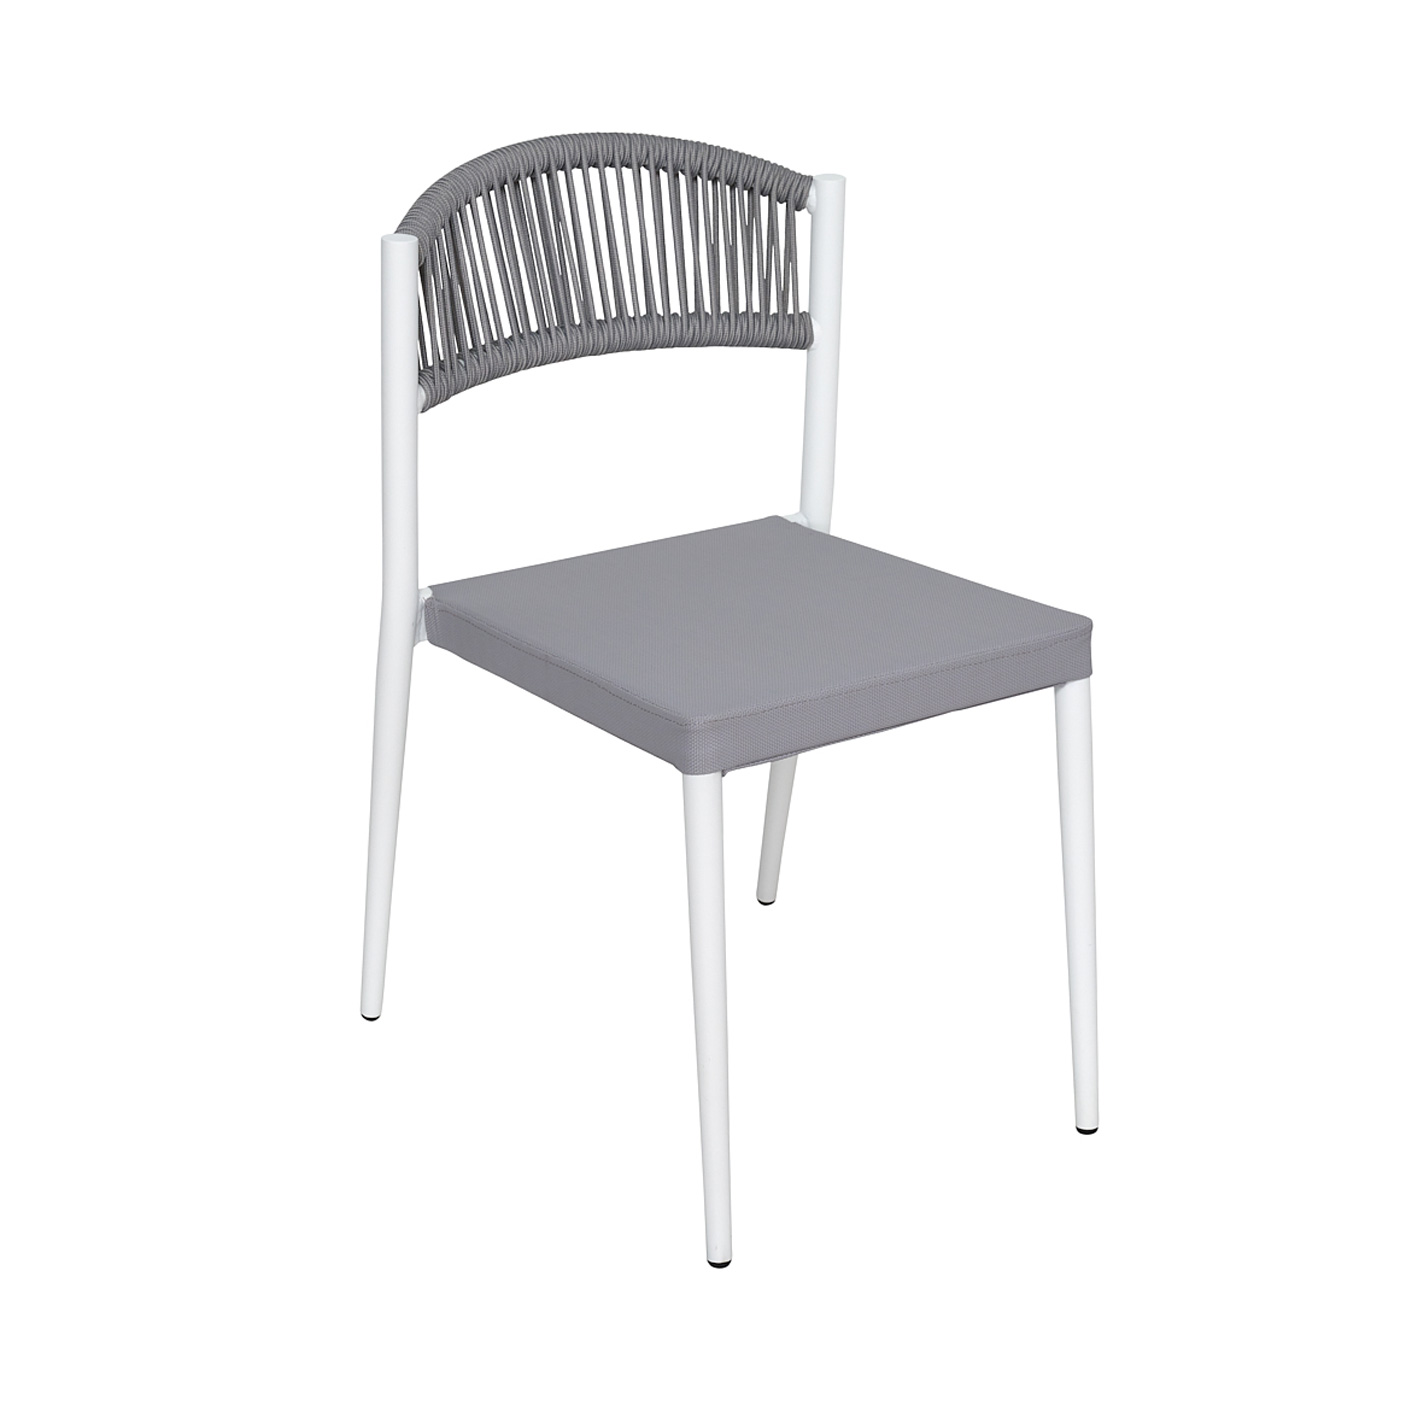 Tahiti Side Chair | Outdoor Dining | White & Grey